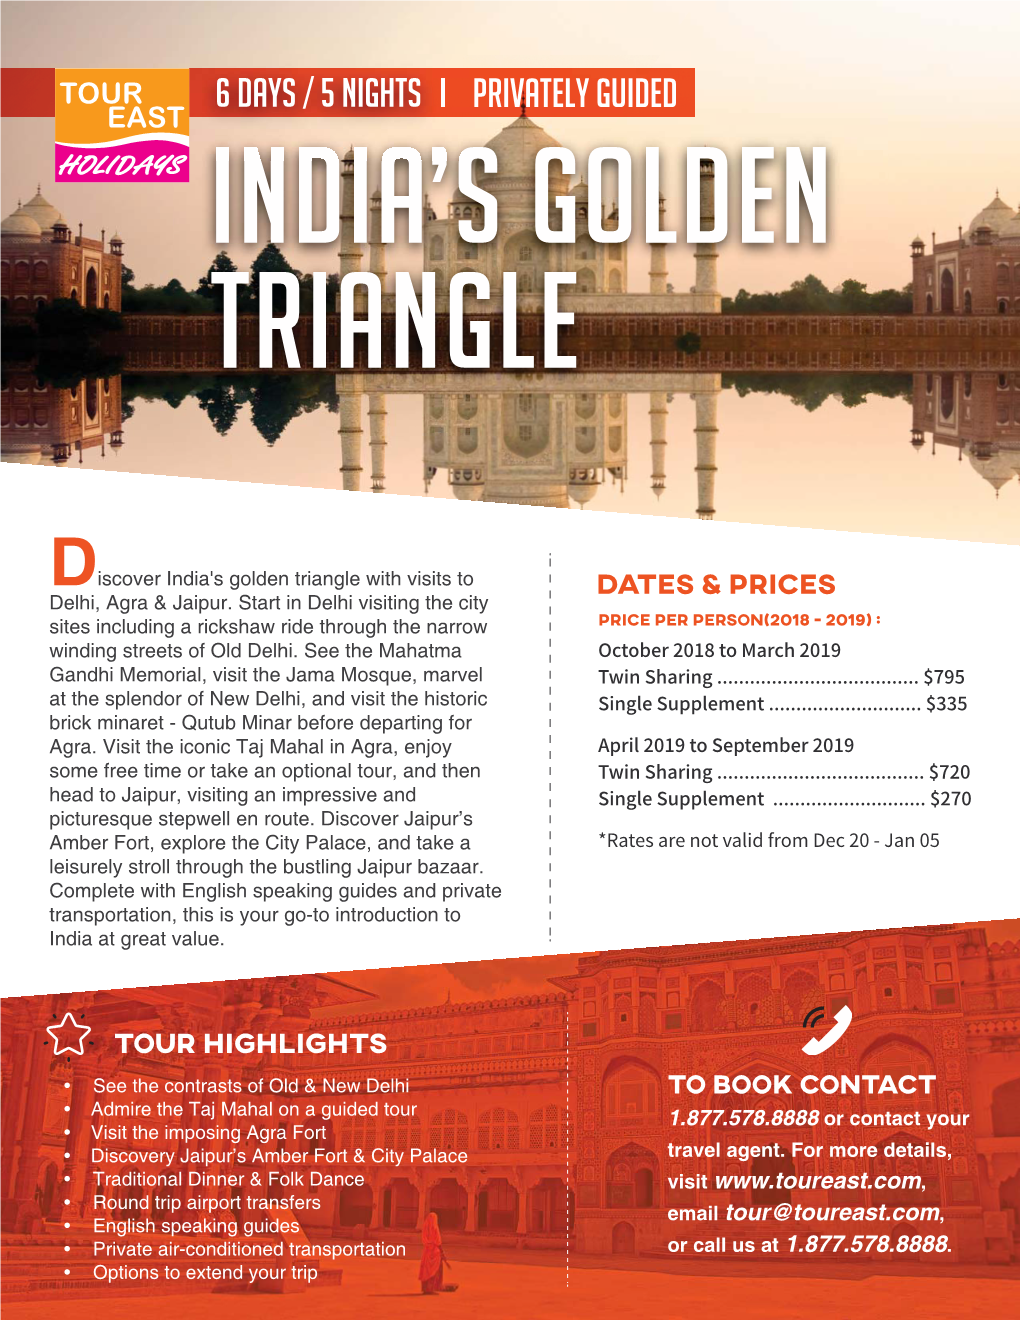 India's Golden Triangle with Visits to DATES & PRICES Delhi, Agra & Jaipur